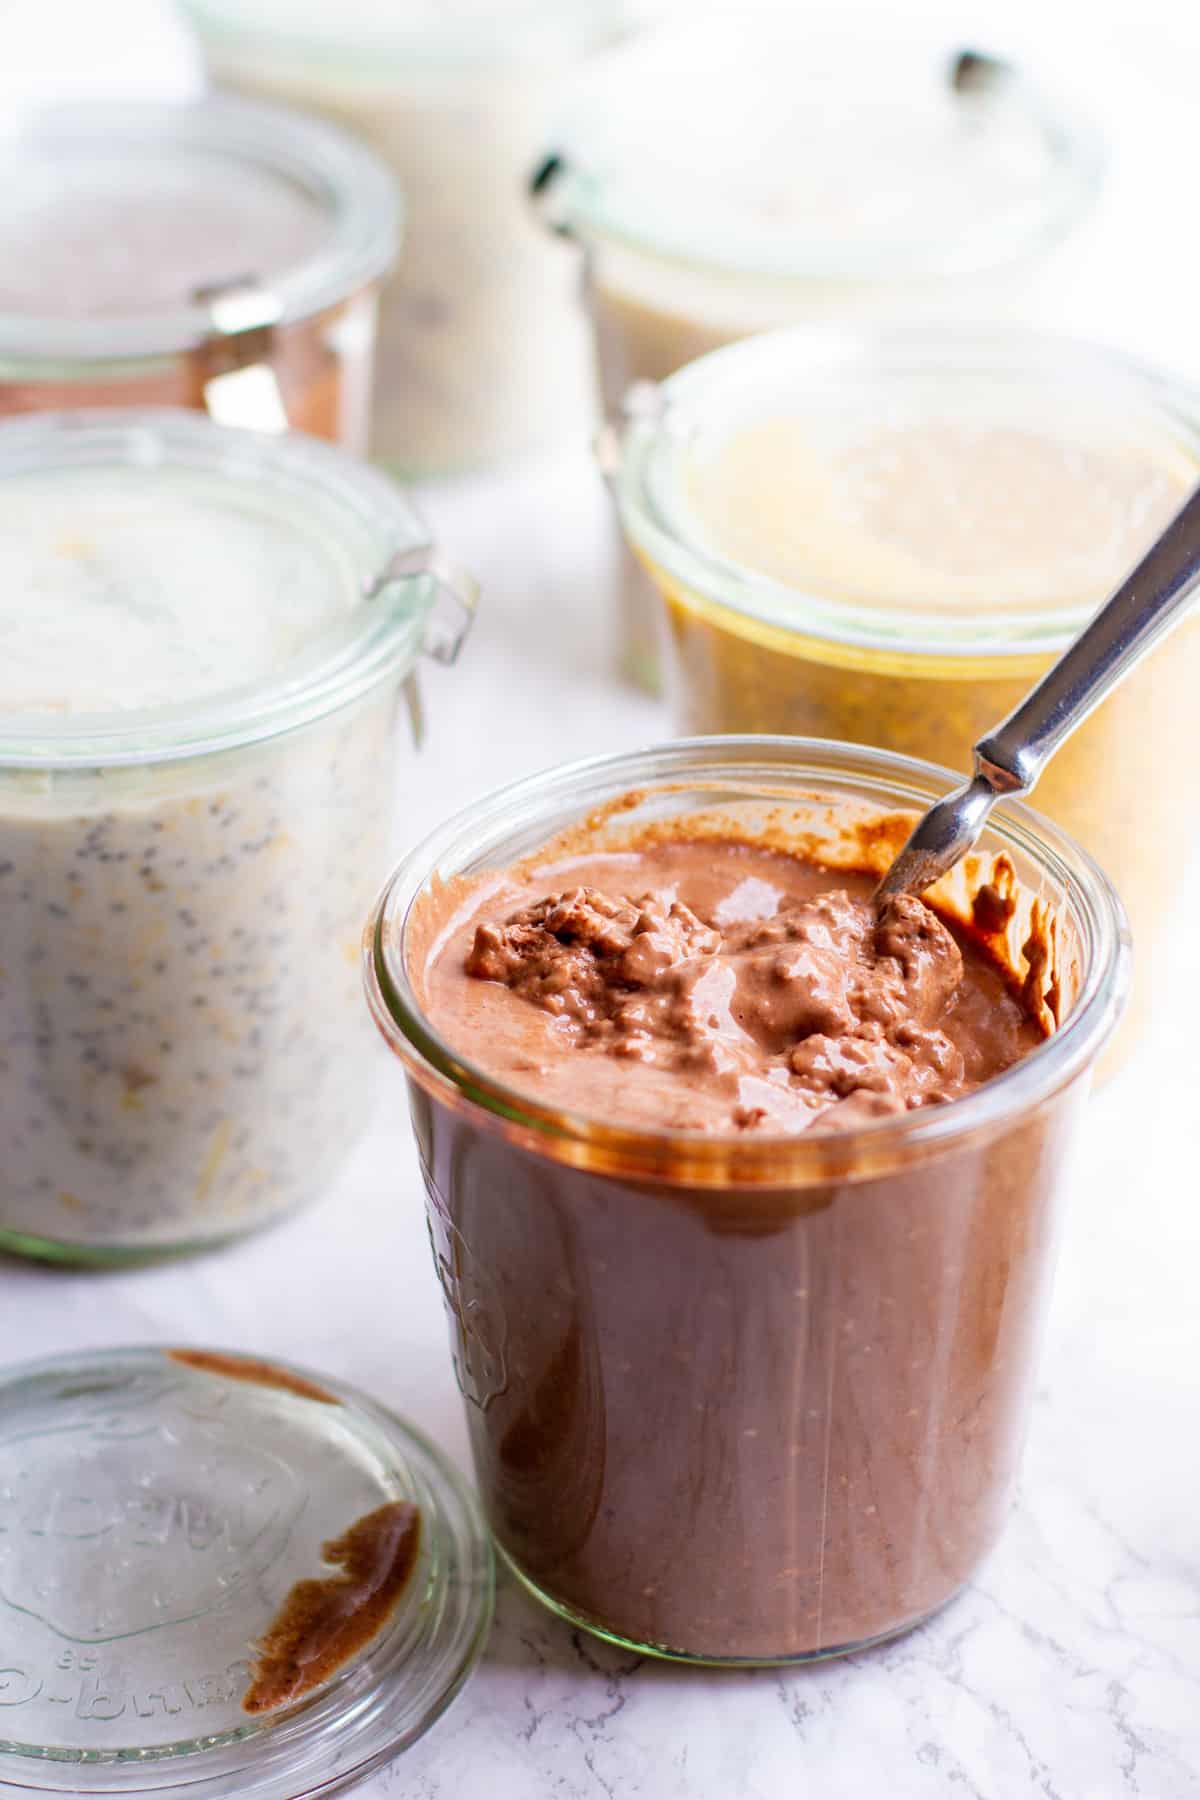 Tight view of a Coconut Chocolate Overnight Oats in a glass jar with a spoon in it.